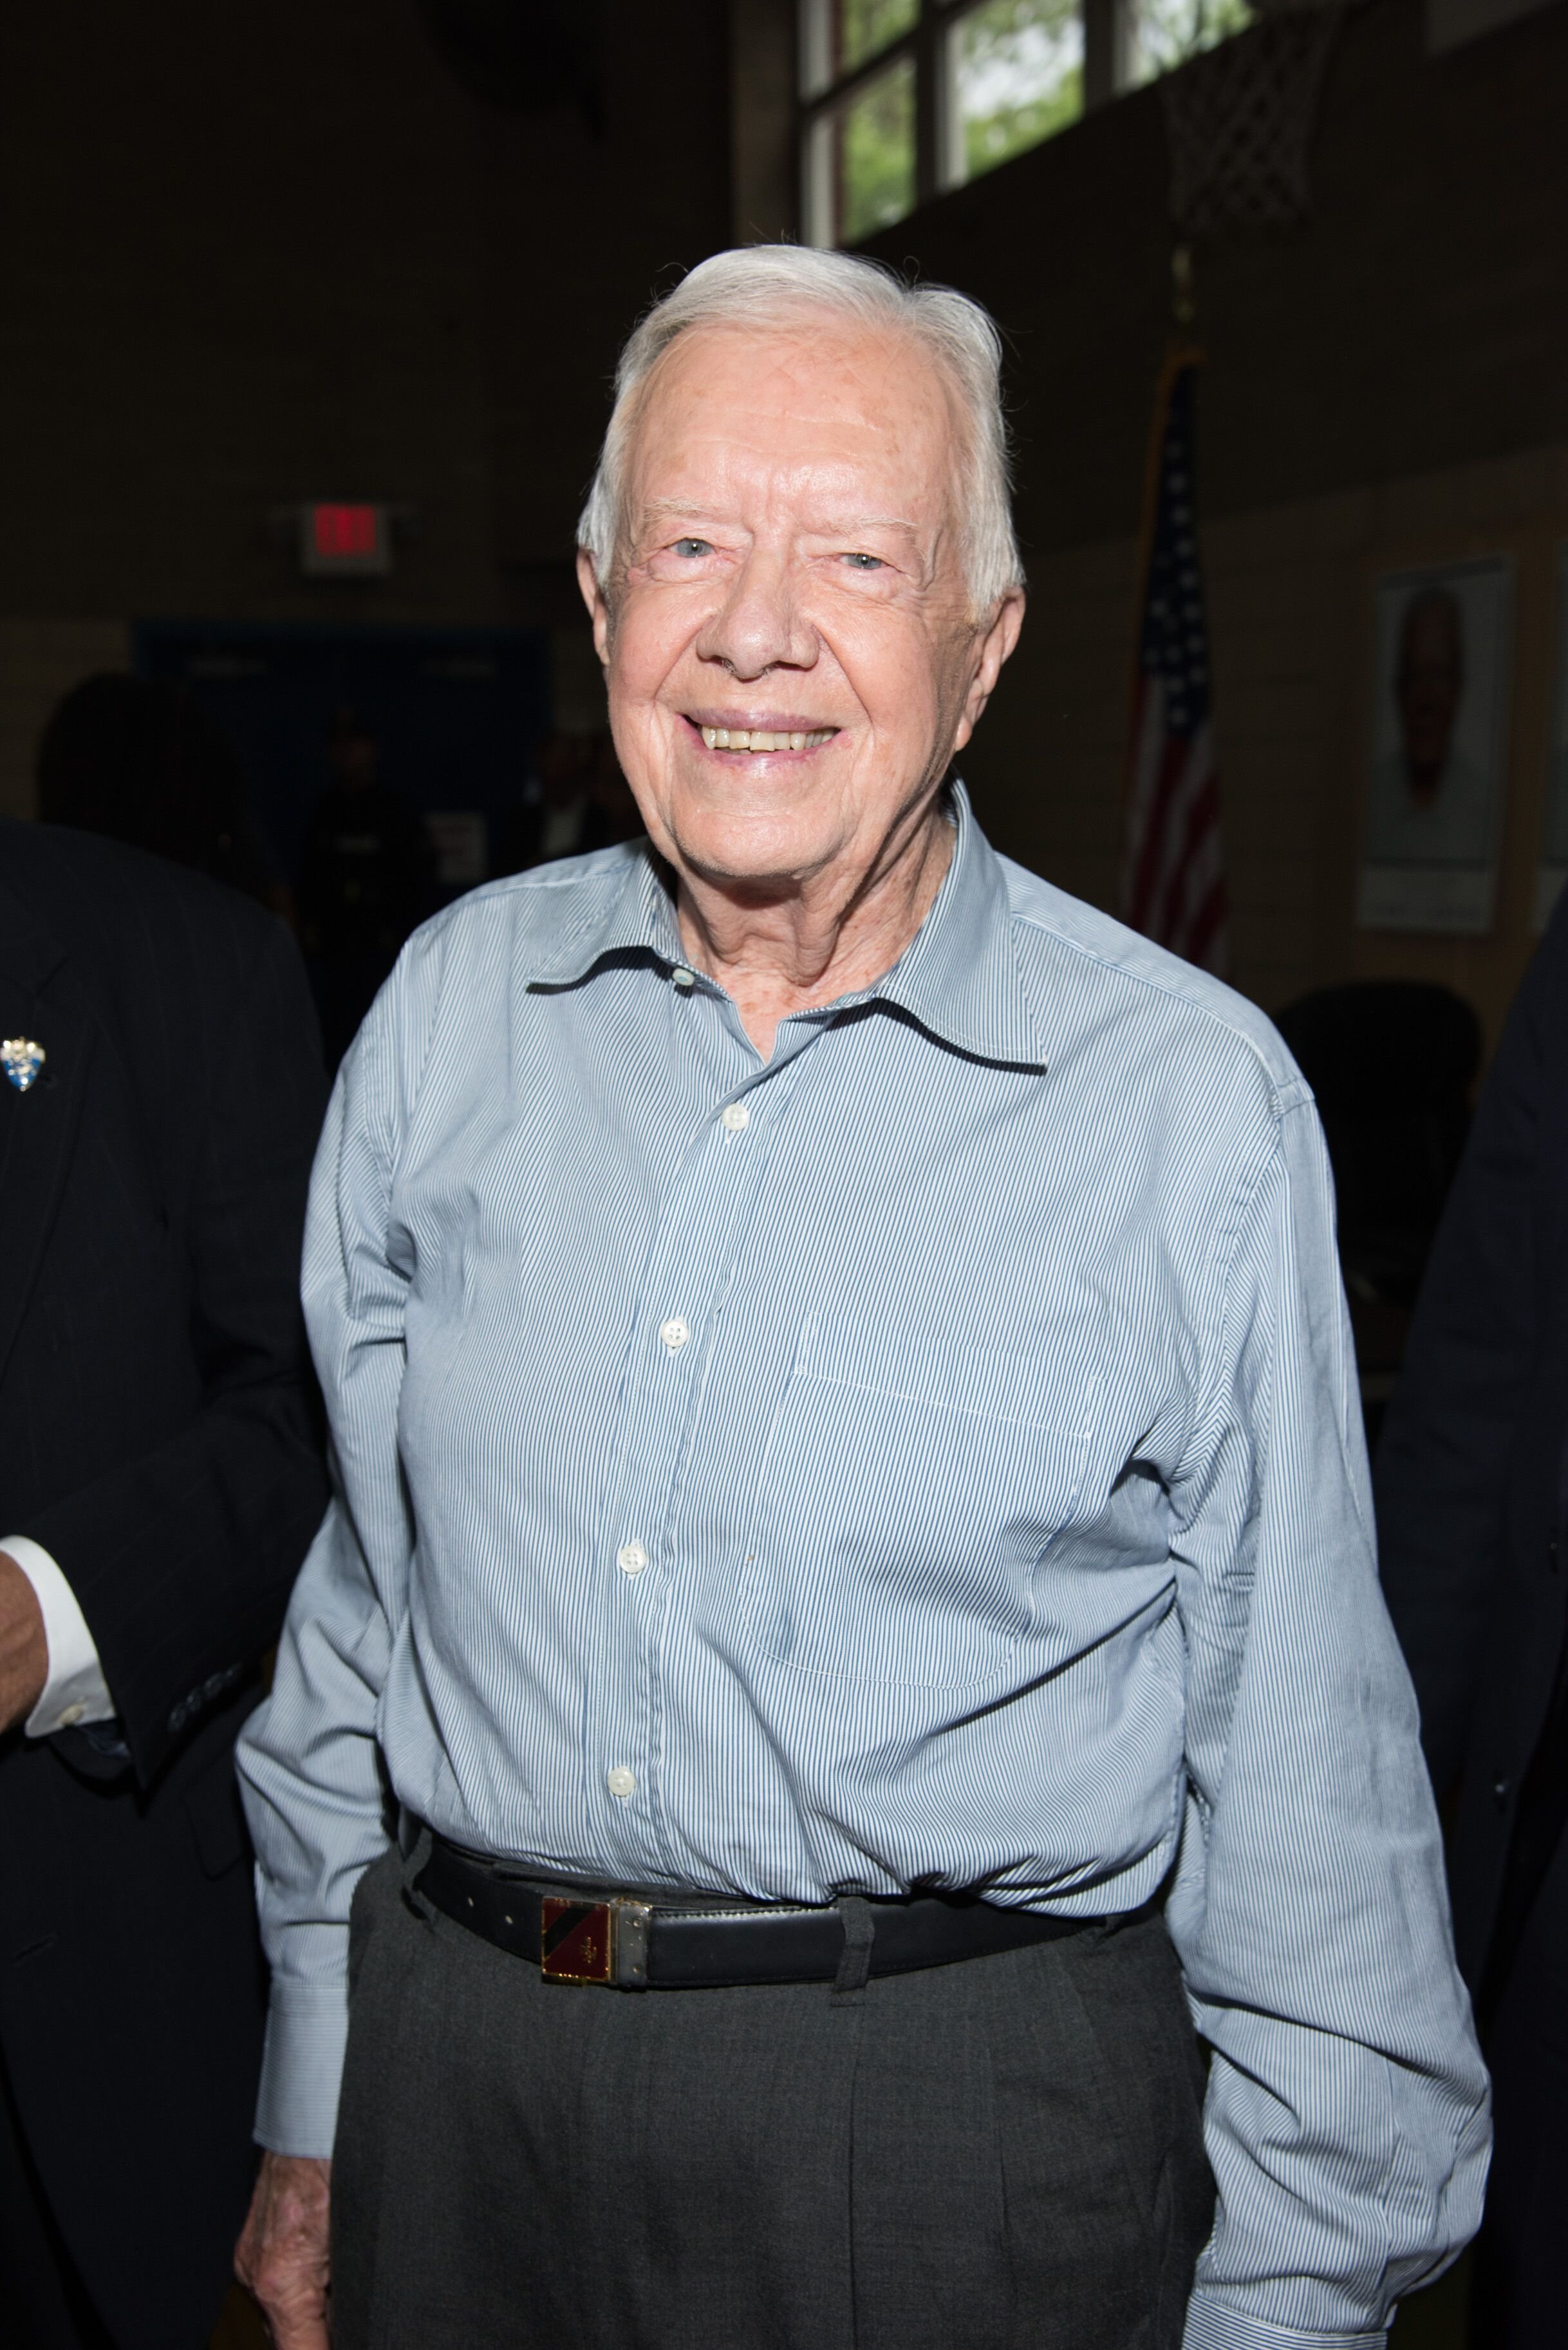 Jimmy Carter signe des copies de "A Full Life Reflections At Ninety" à Bookends Bookstore le 8 juillet 2015 à Ridgewood, New Jersey | Photo: Dave Kotinsky / Getty Images